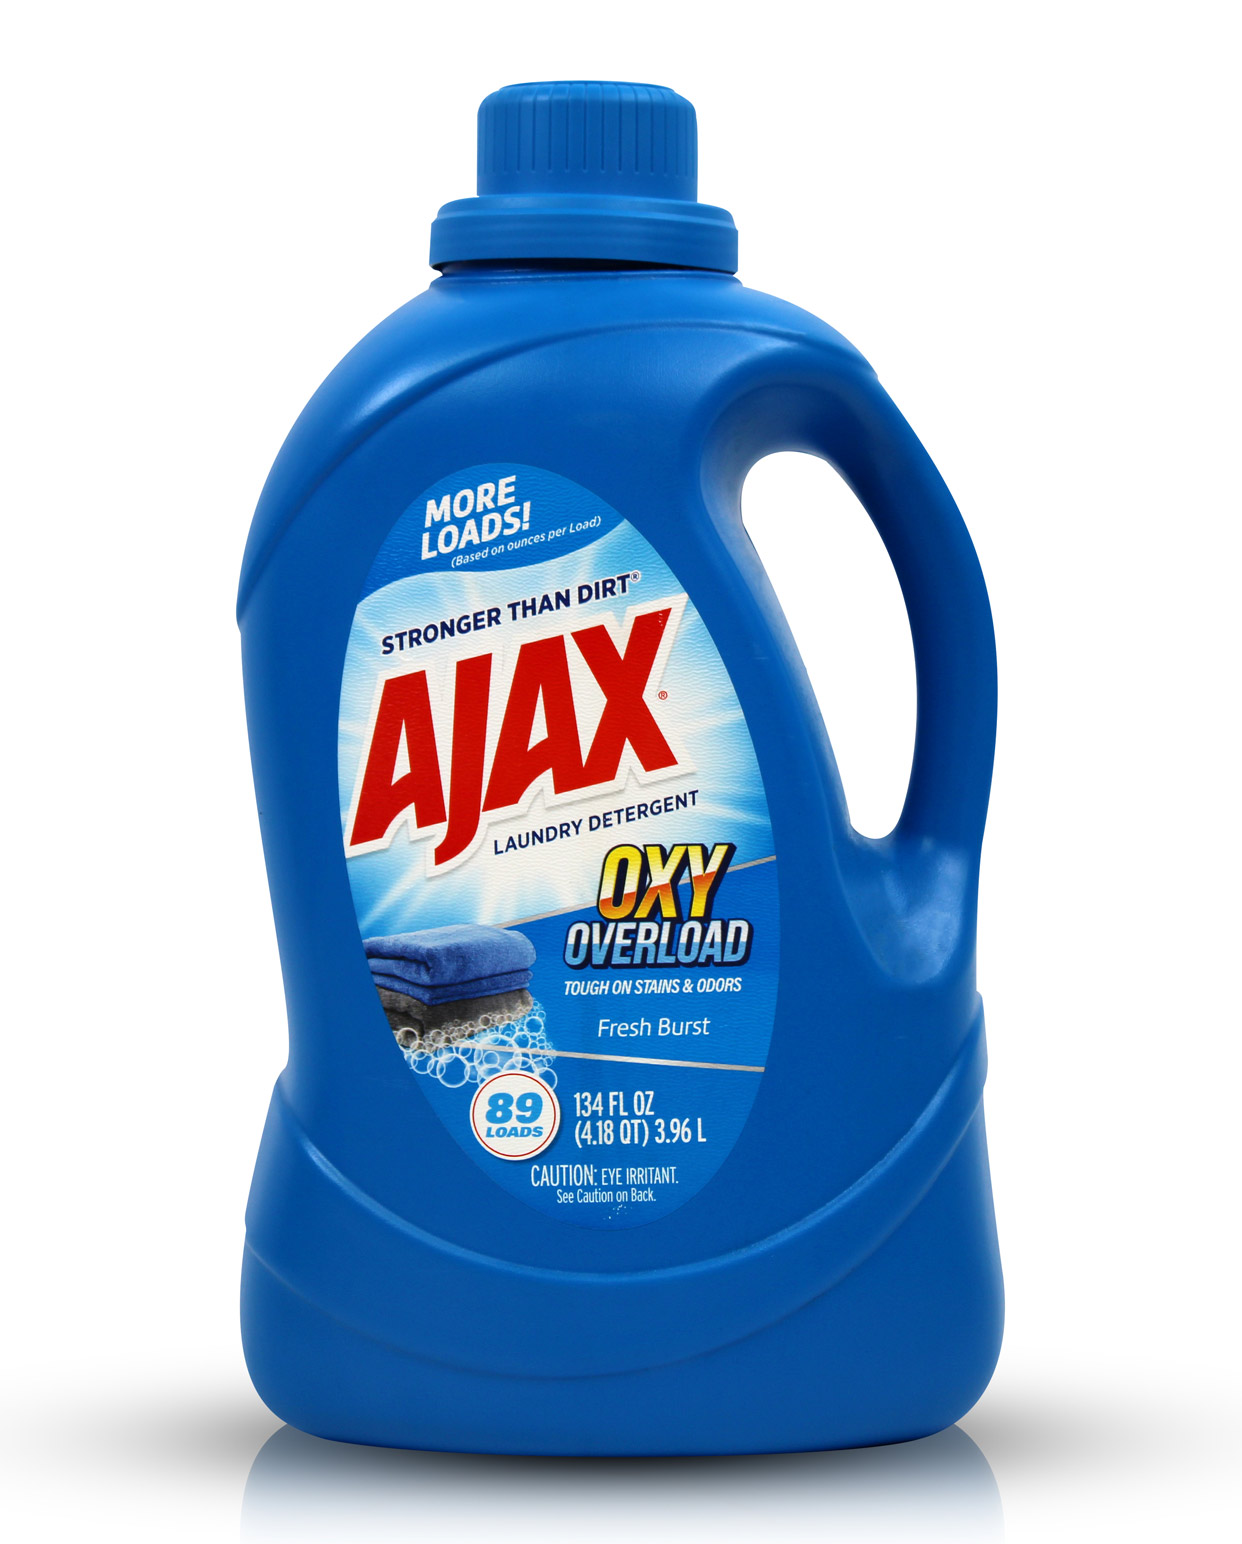 134oz bottle of AJAX Oxygen-powered laundry detergent Oxy Overload with a clear label.